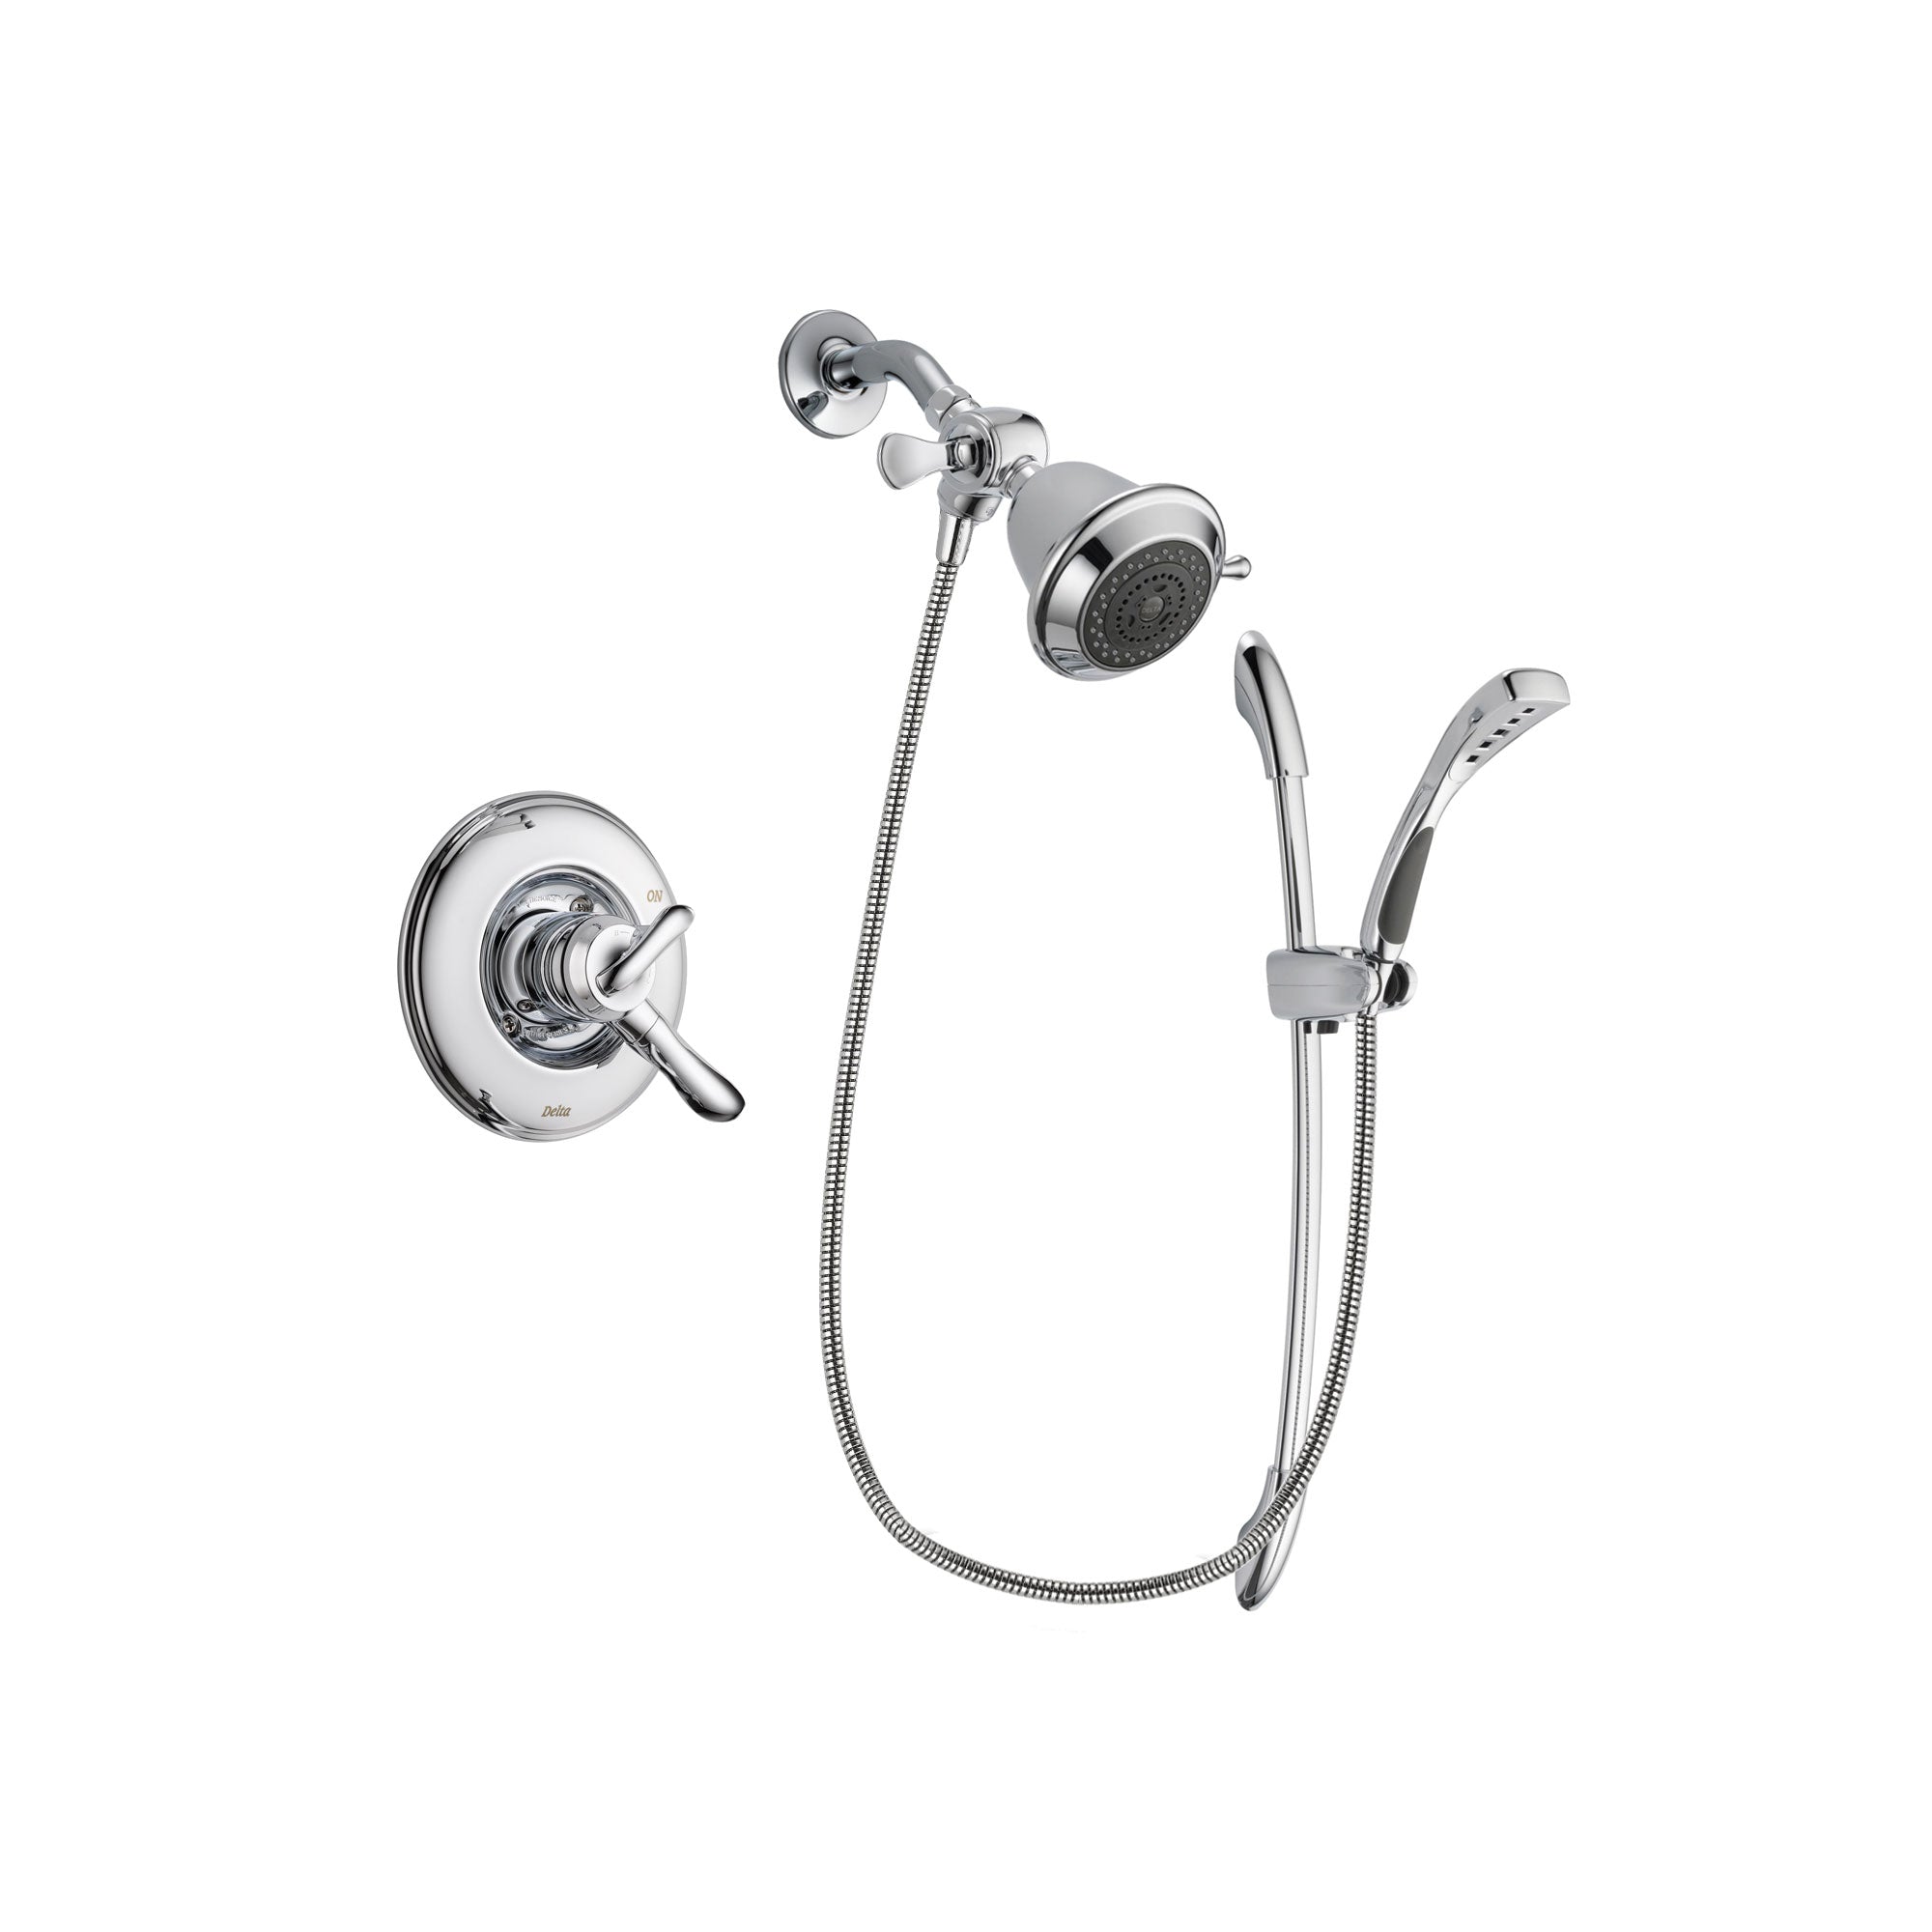 Delta Linden Chrome Finish Dual Control Shower Faucet System Package with Shower Head and Handheld Shower with Slide Bar Includes Rough-in Valve DSP0456V